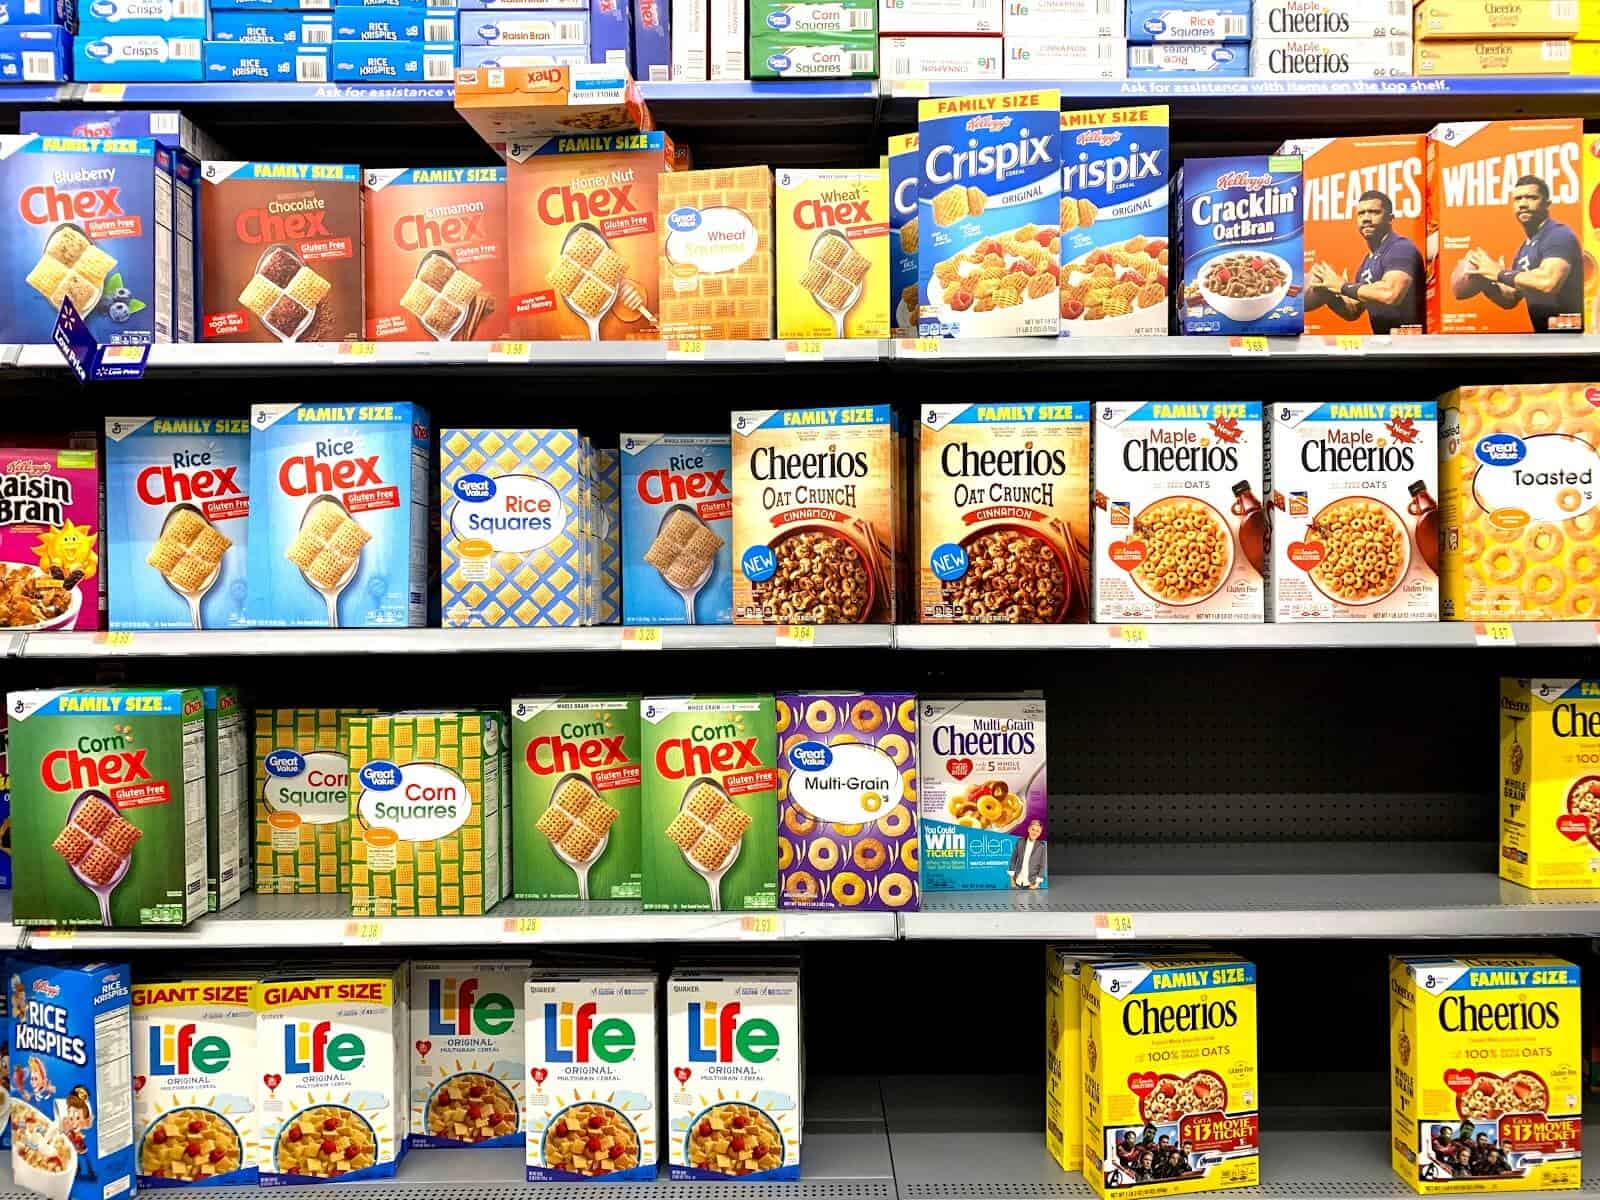 Shipt vs Instacart: Cereal aisle at grocery store